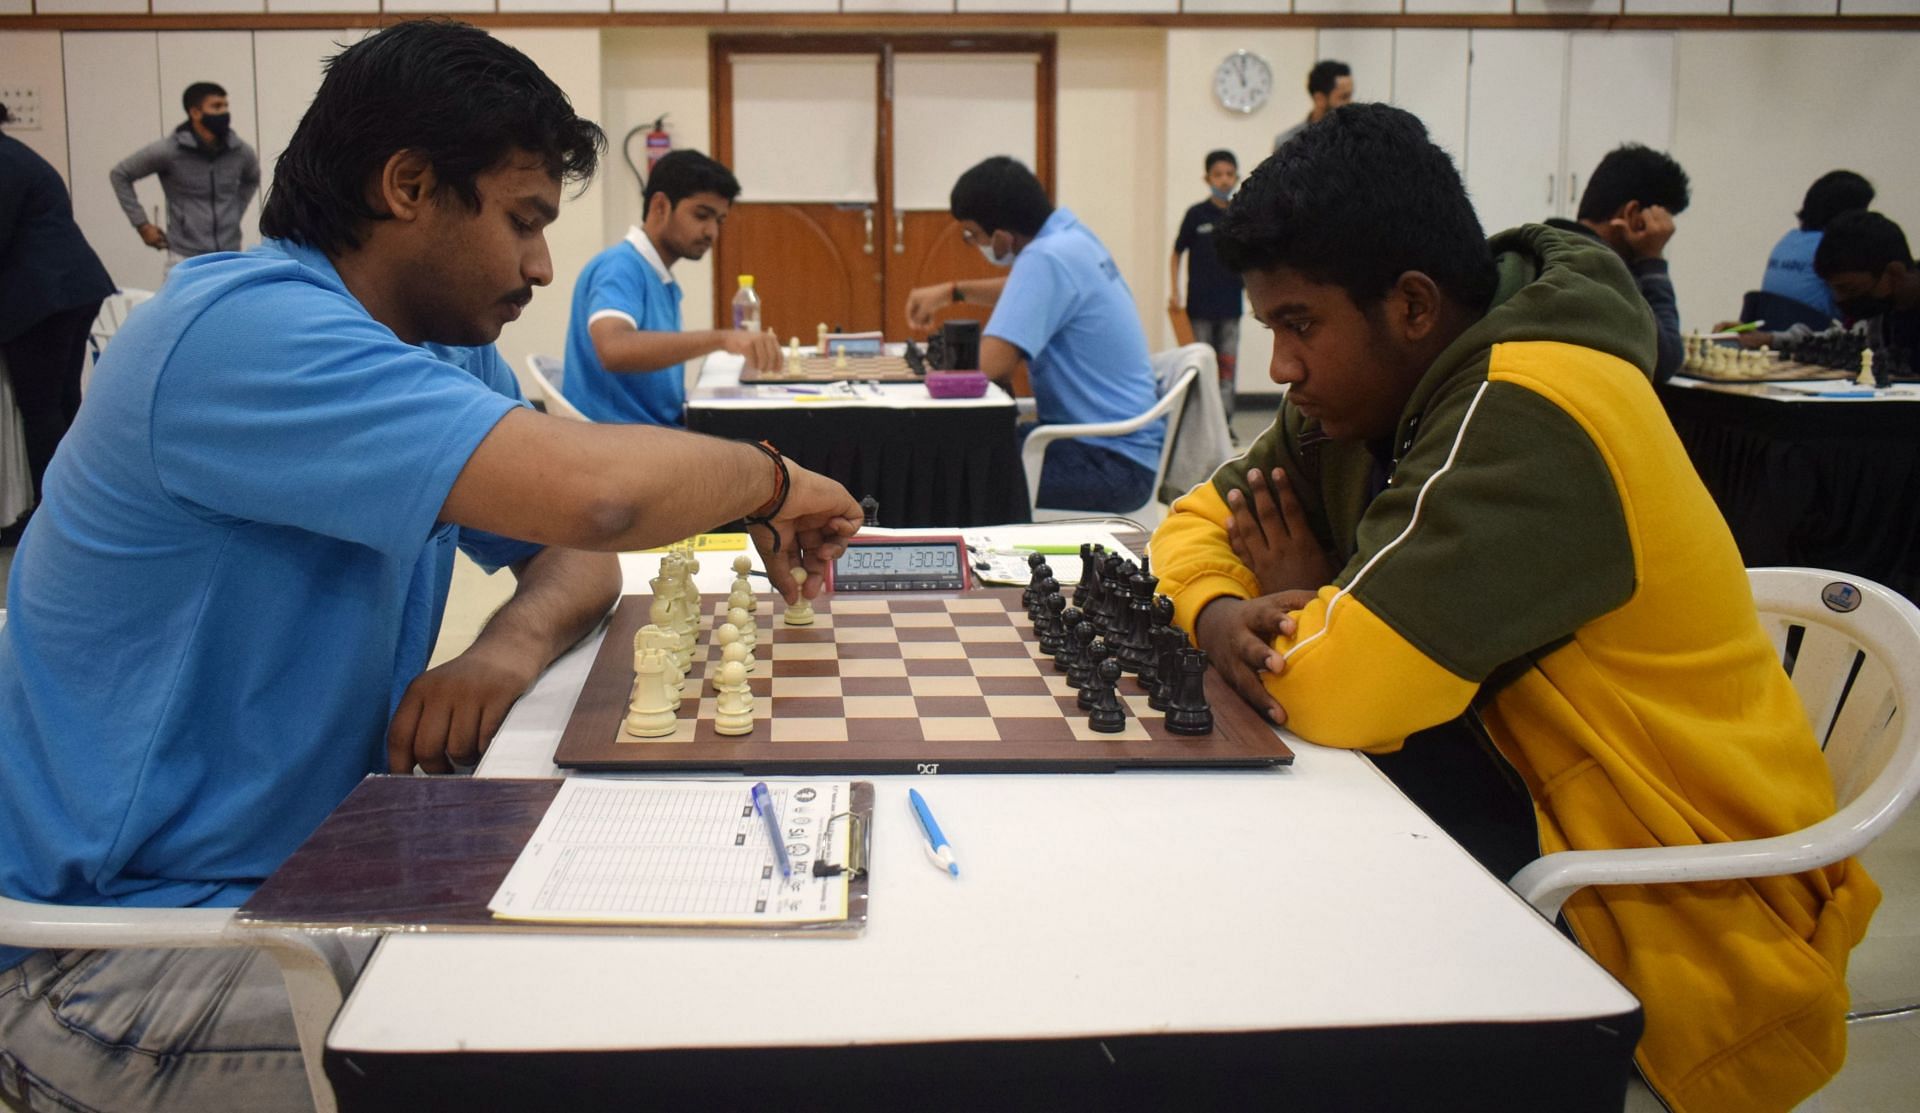 IM Rahul VS (L) playing against Prathamesh Gawade in the first round. (Pic credit: MCA)